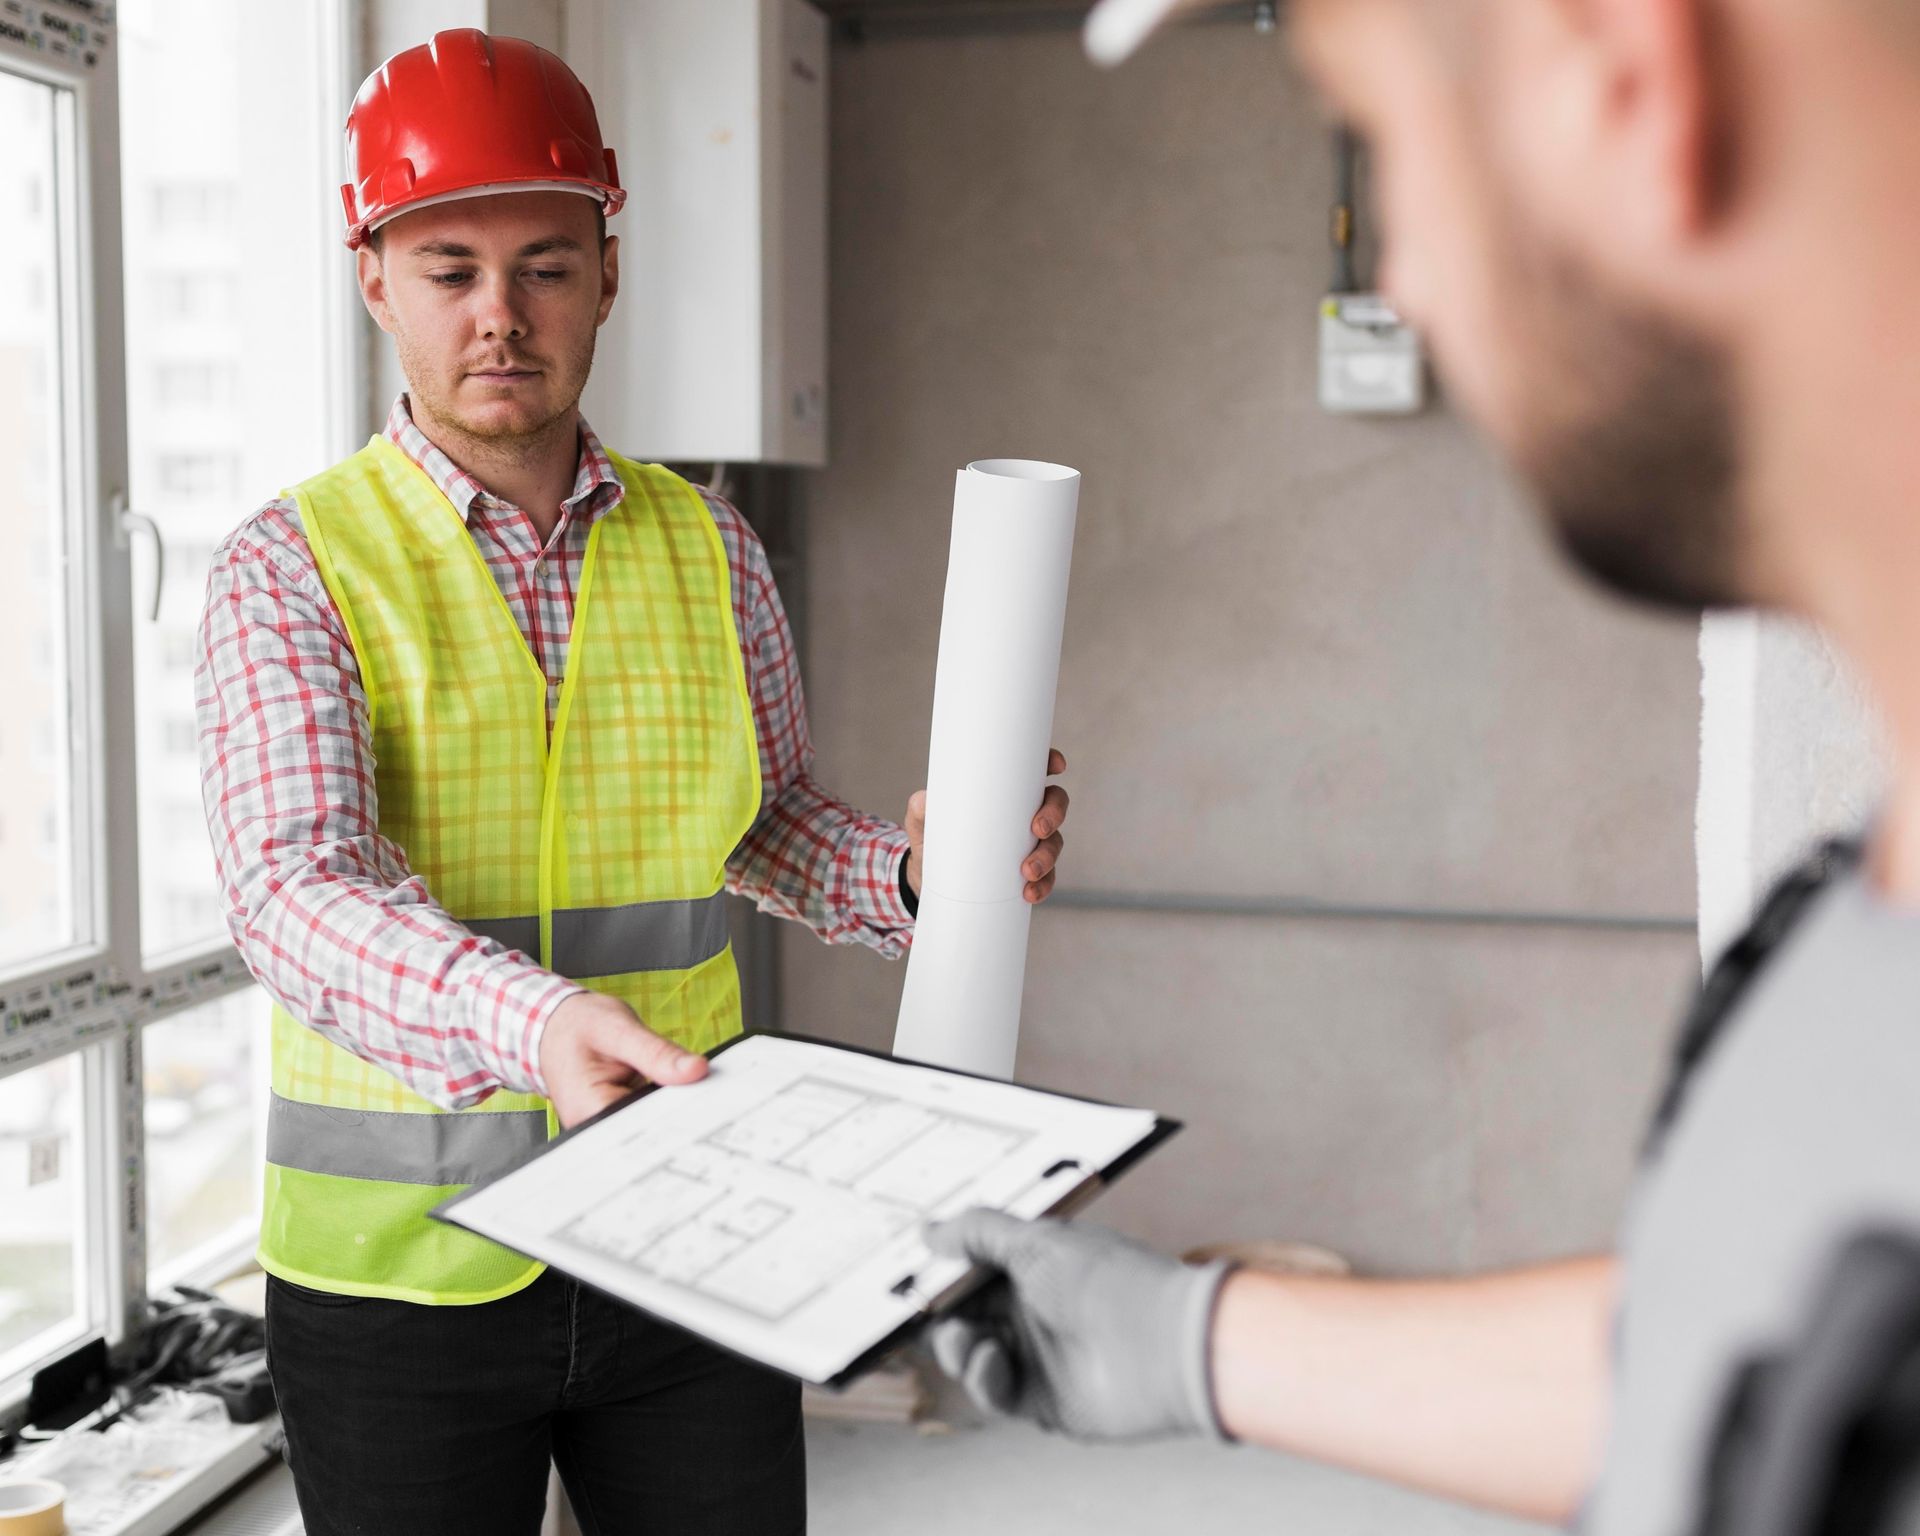 Commercial surveying service worker handing piece of paper